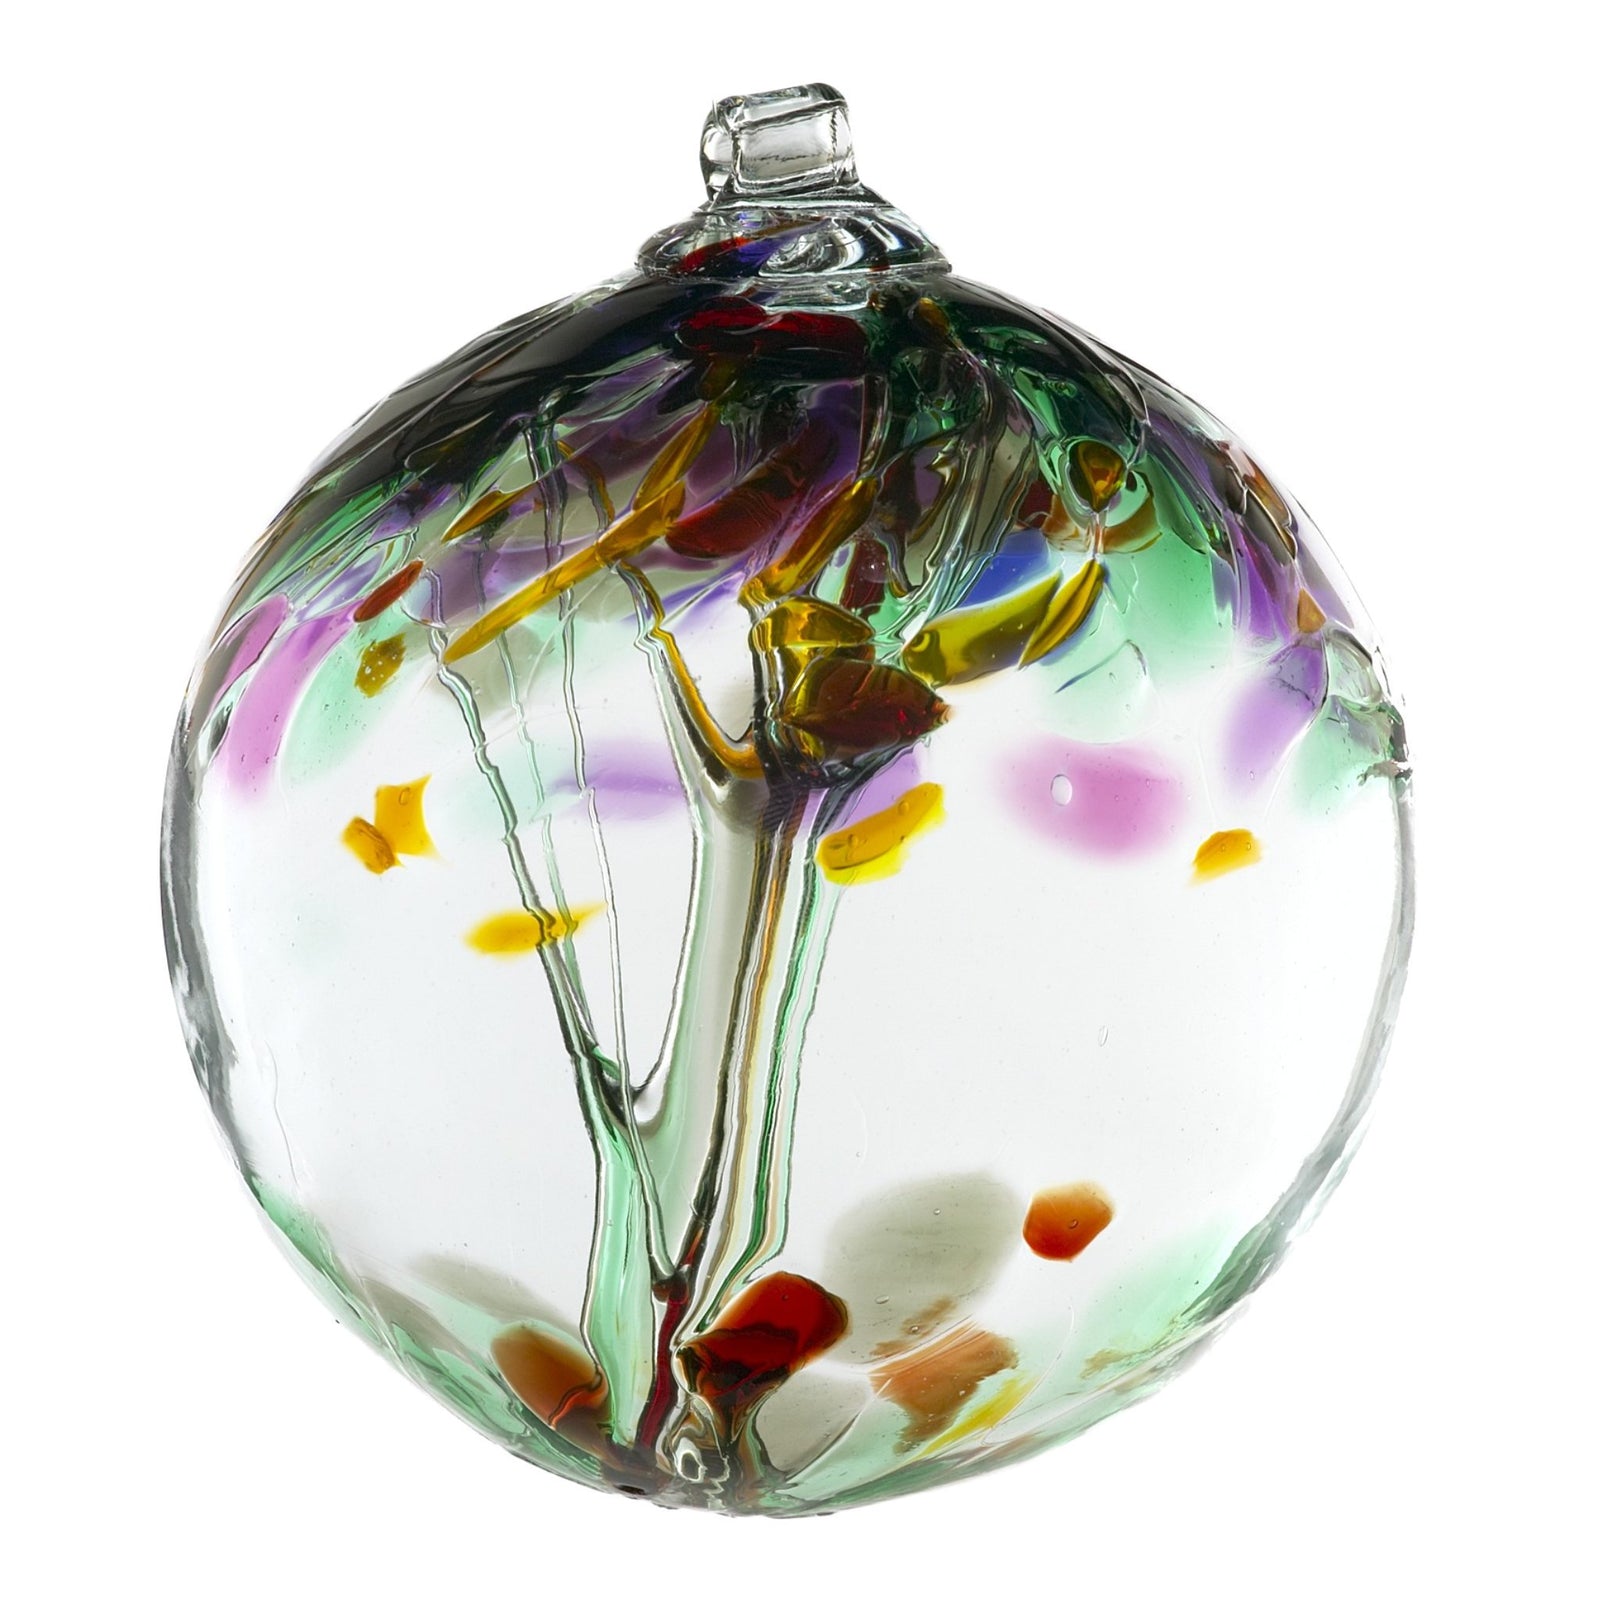 Tree of Enchantment Ball | Remembrance 6" Hand-blown Art Glass Ornament